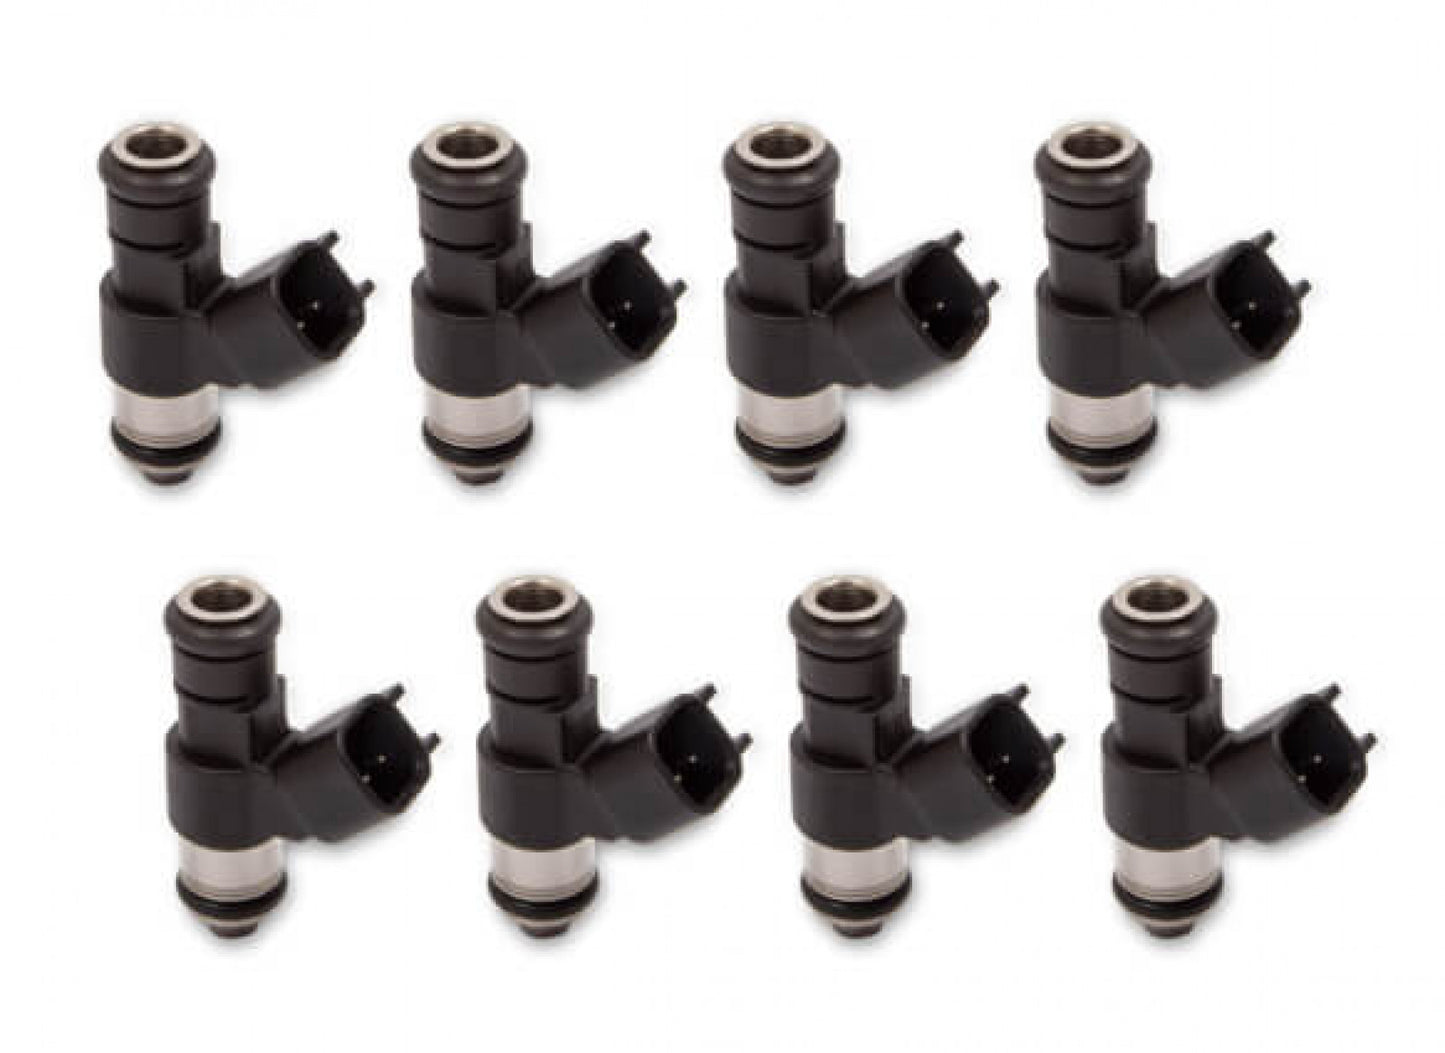 Holley EFI Performance Fuel Injectors - Set of Eight 3522-228X